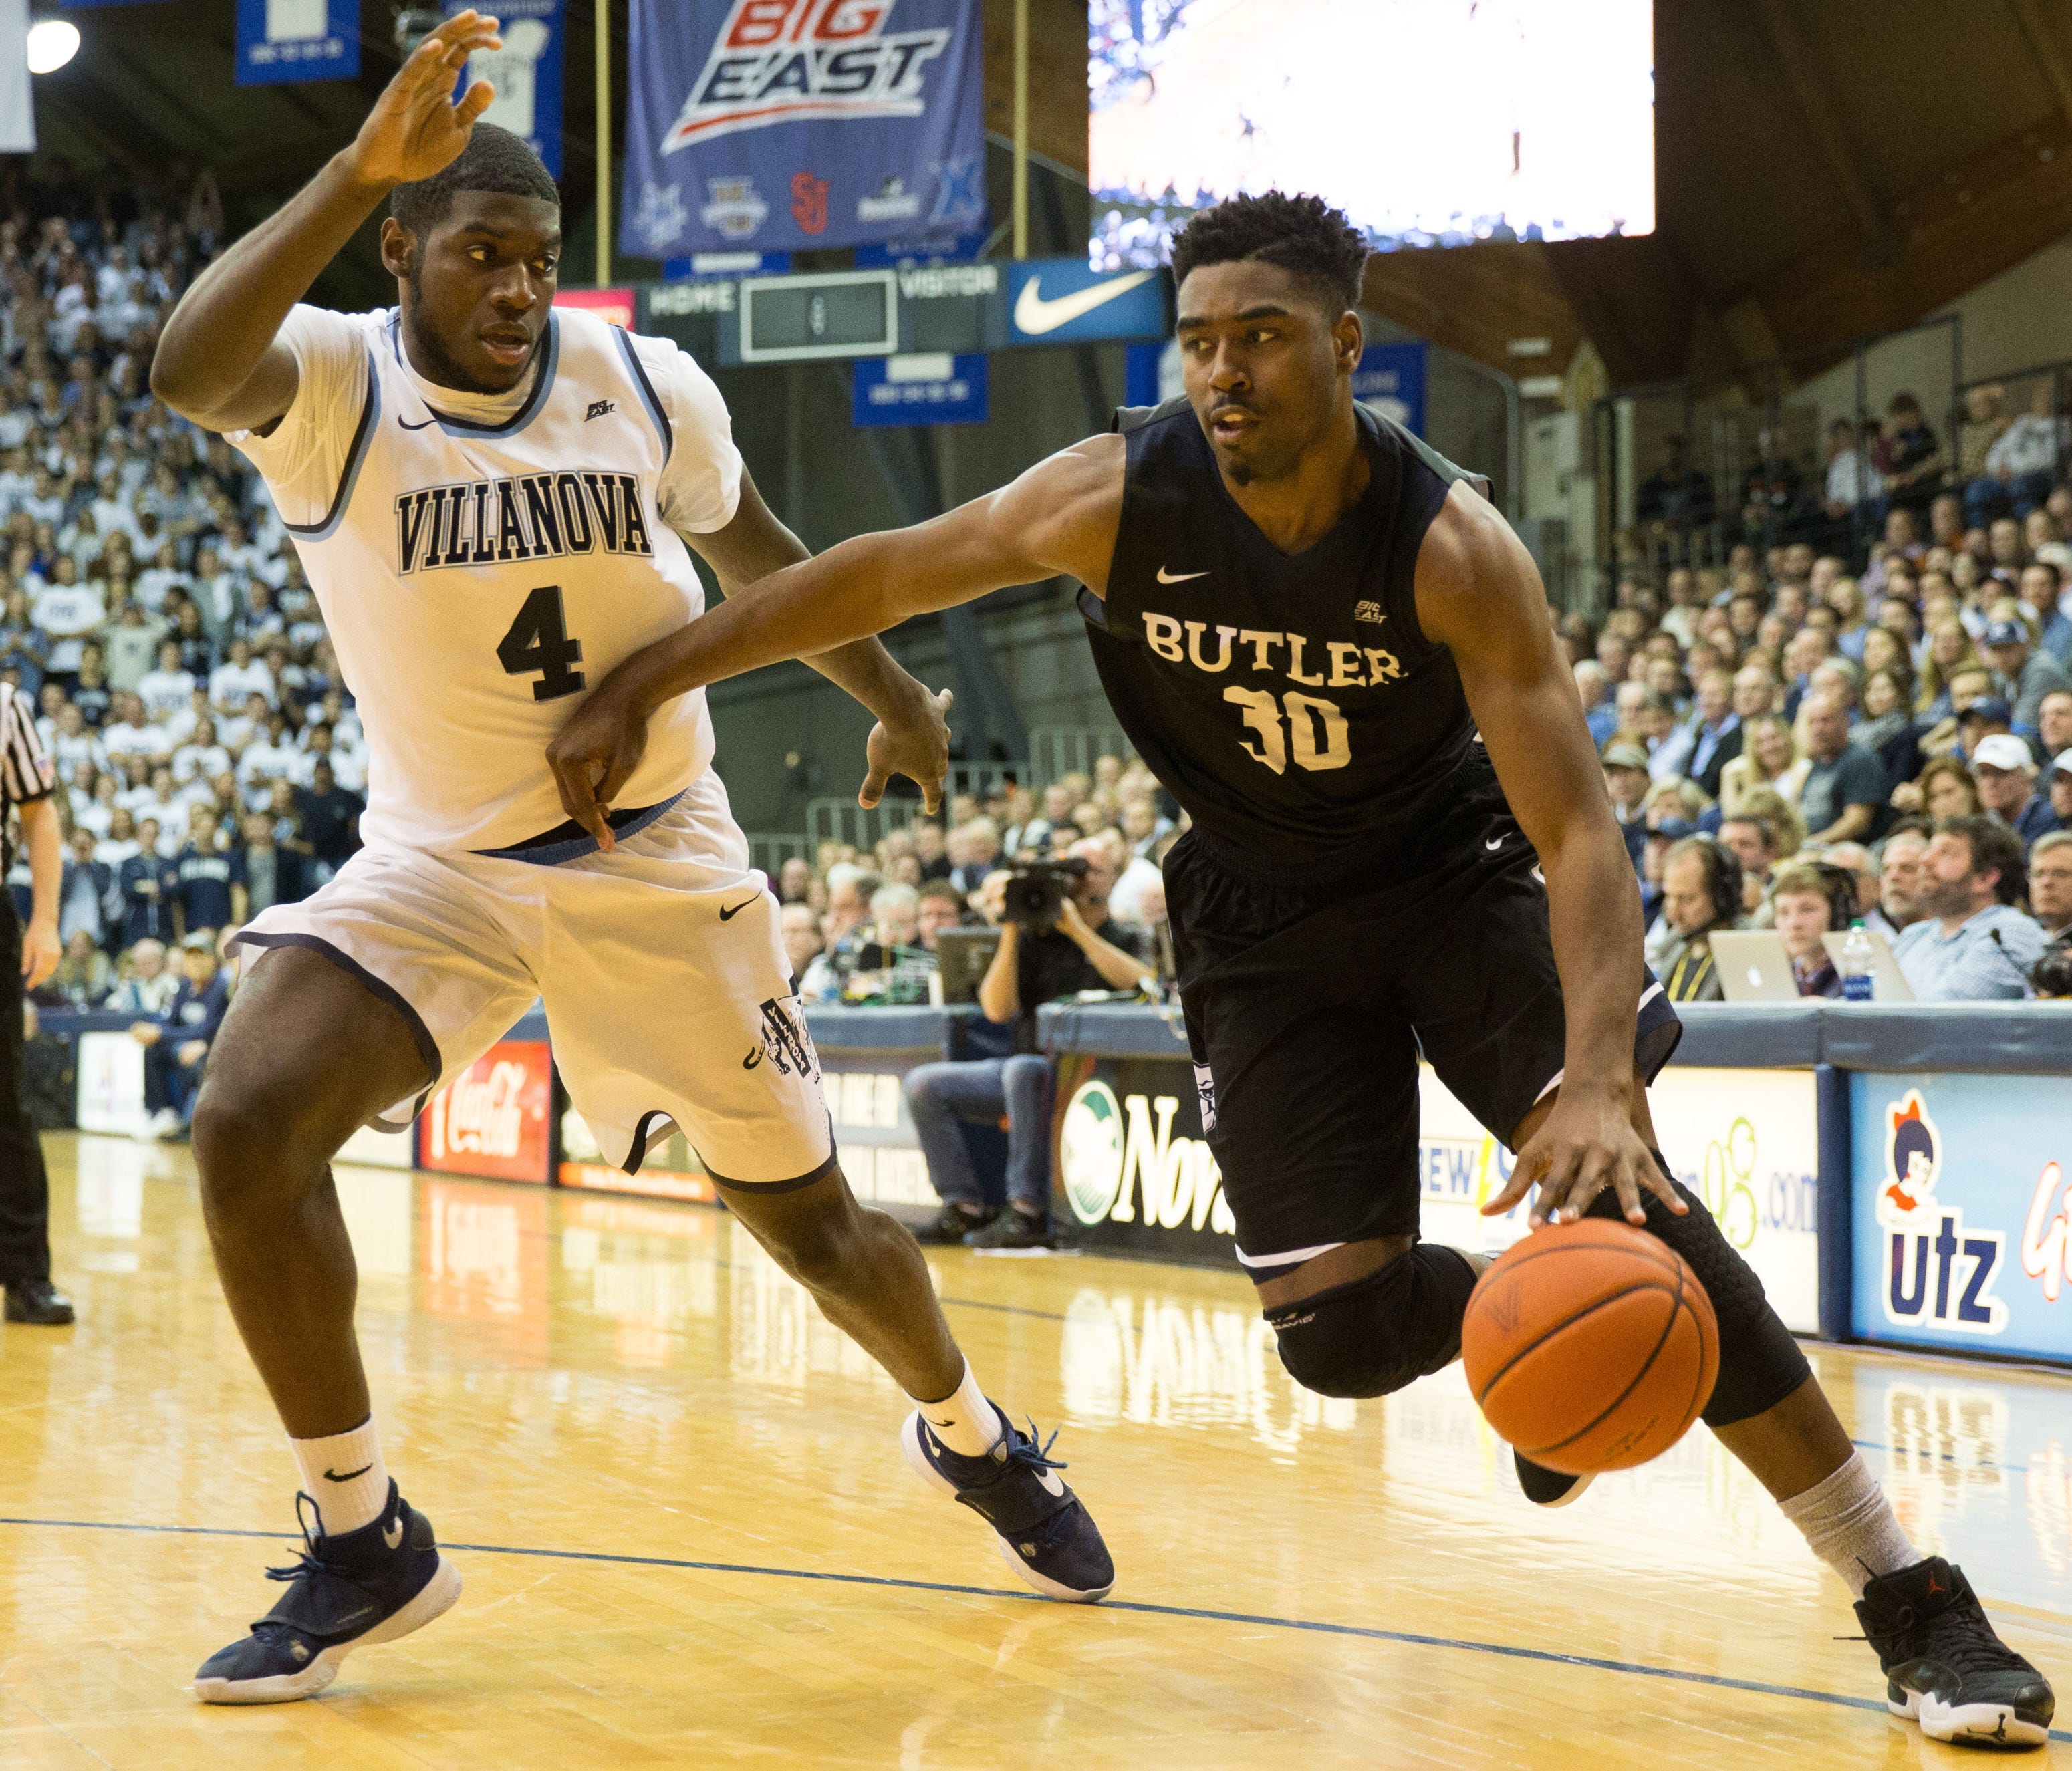 Butler defeated defending national champion Villanova twice this season, including a 74 - 66 road win on Feb. 22.